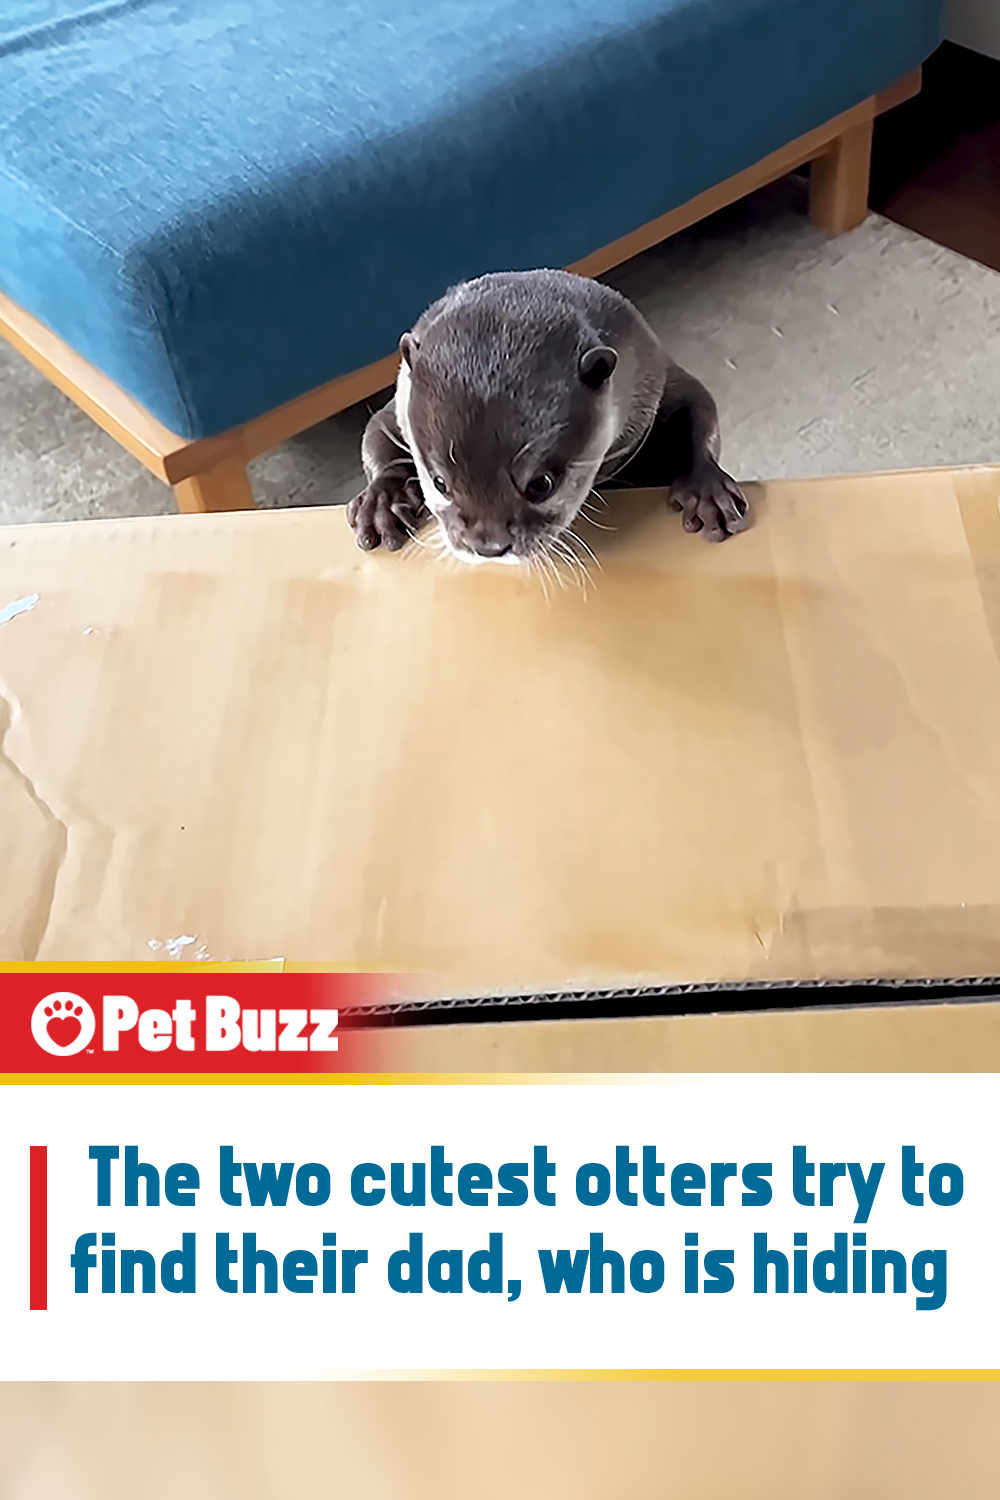 The two cutest otters try to find their dad, who is hiding